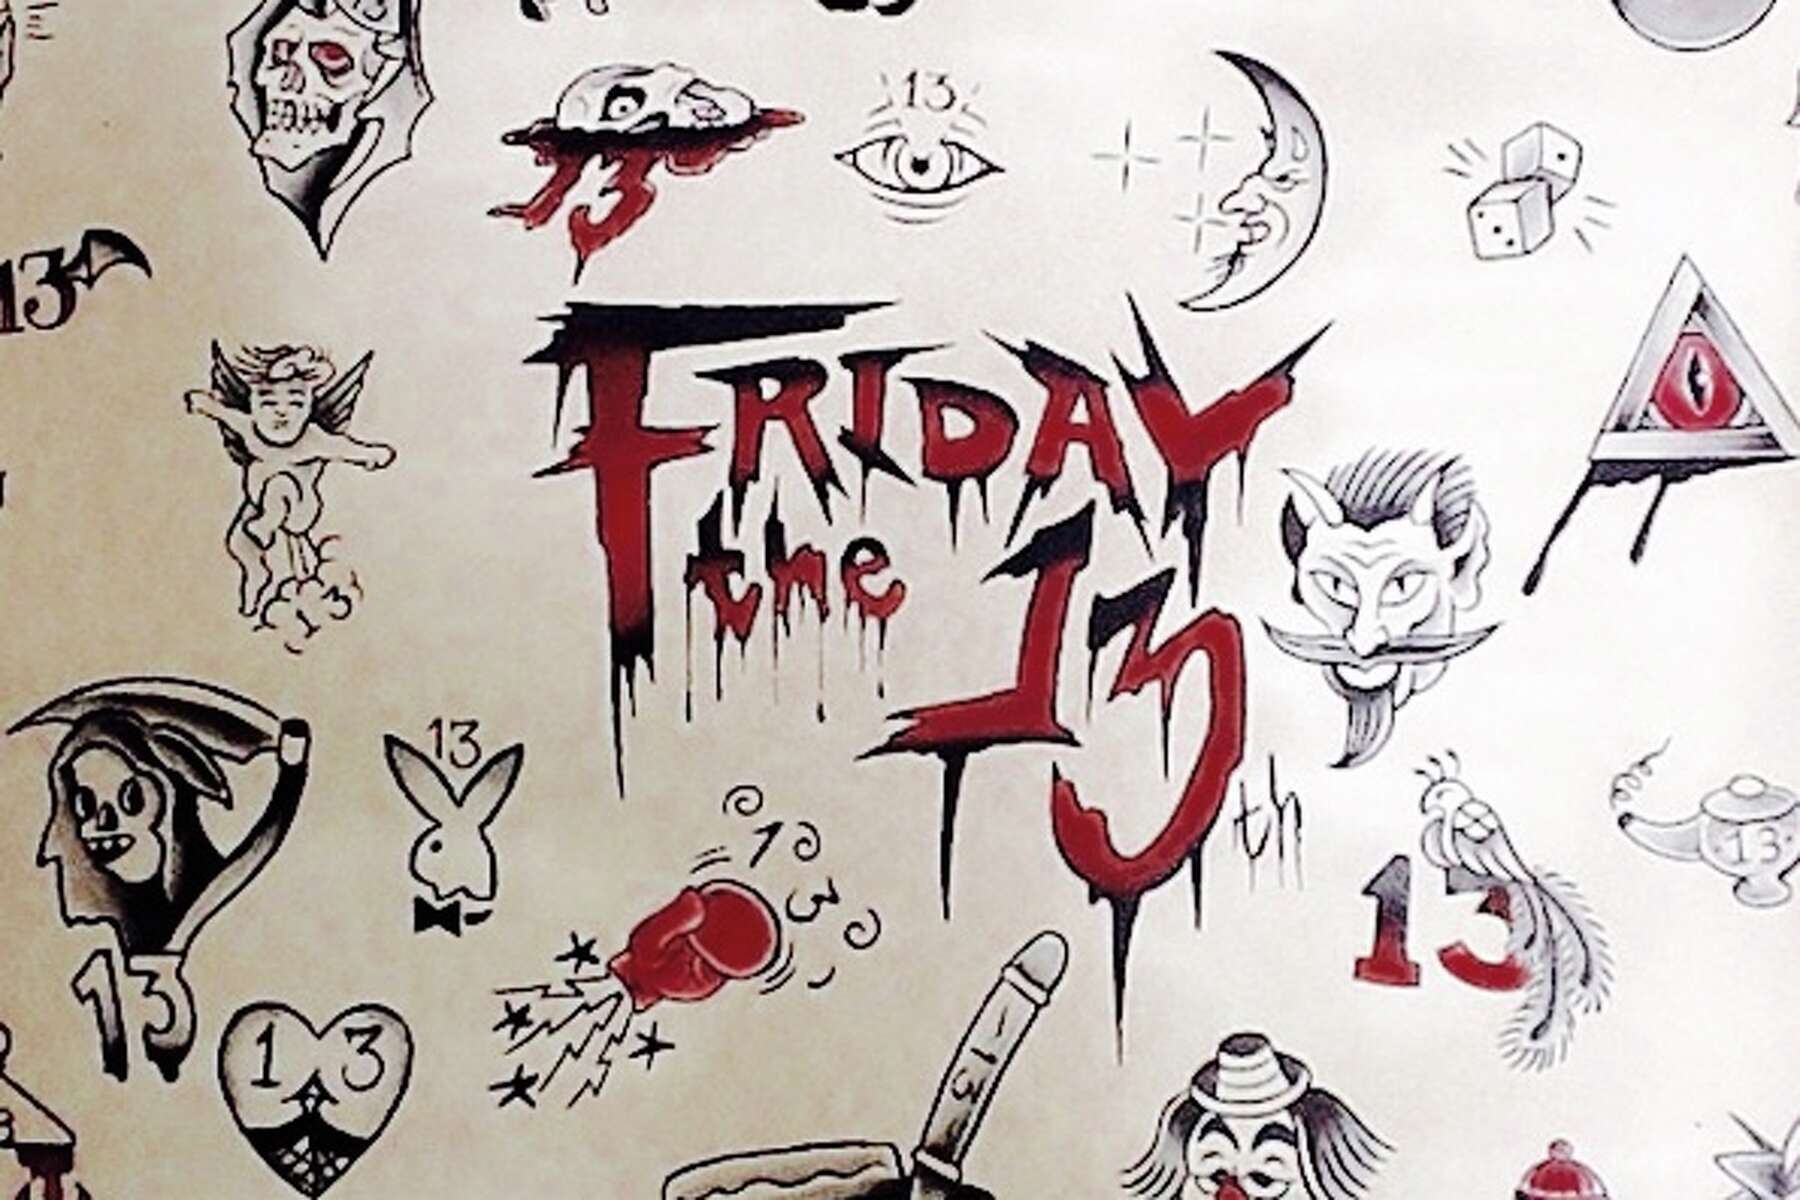 friday the 13th $20 tattoos near me